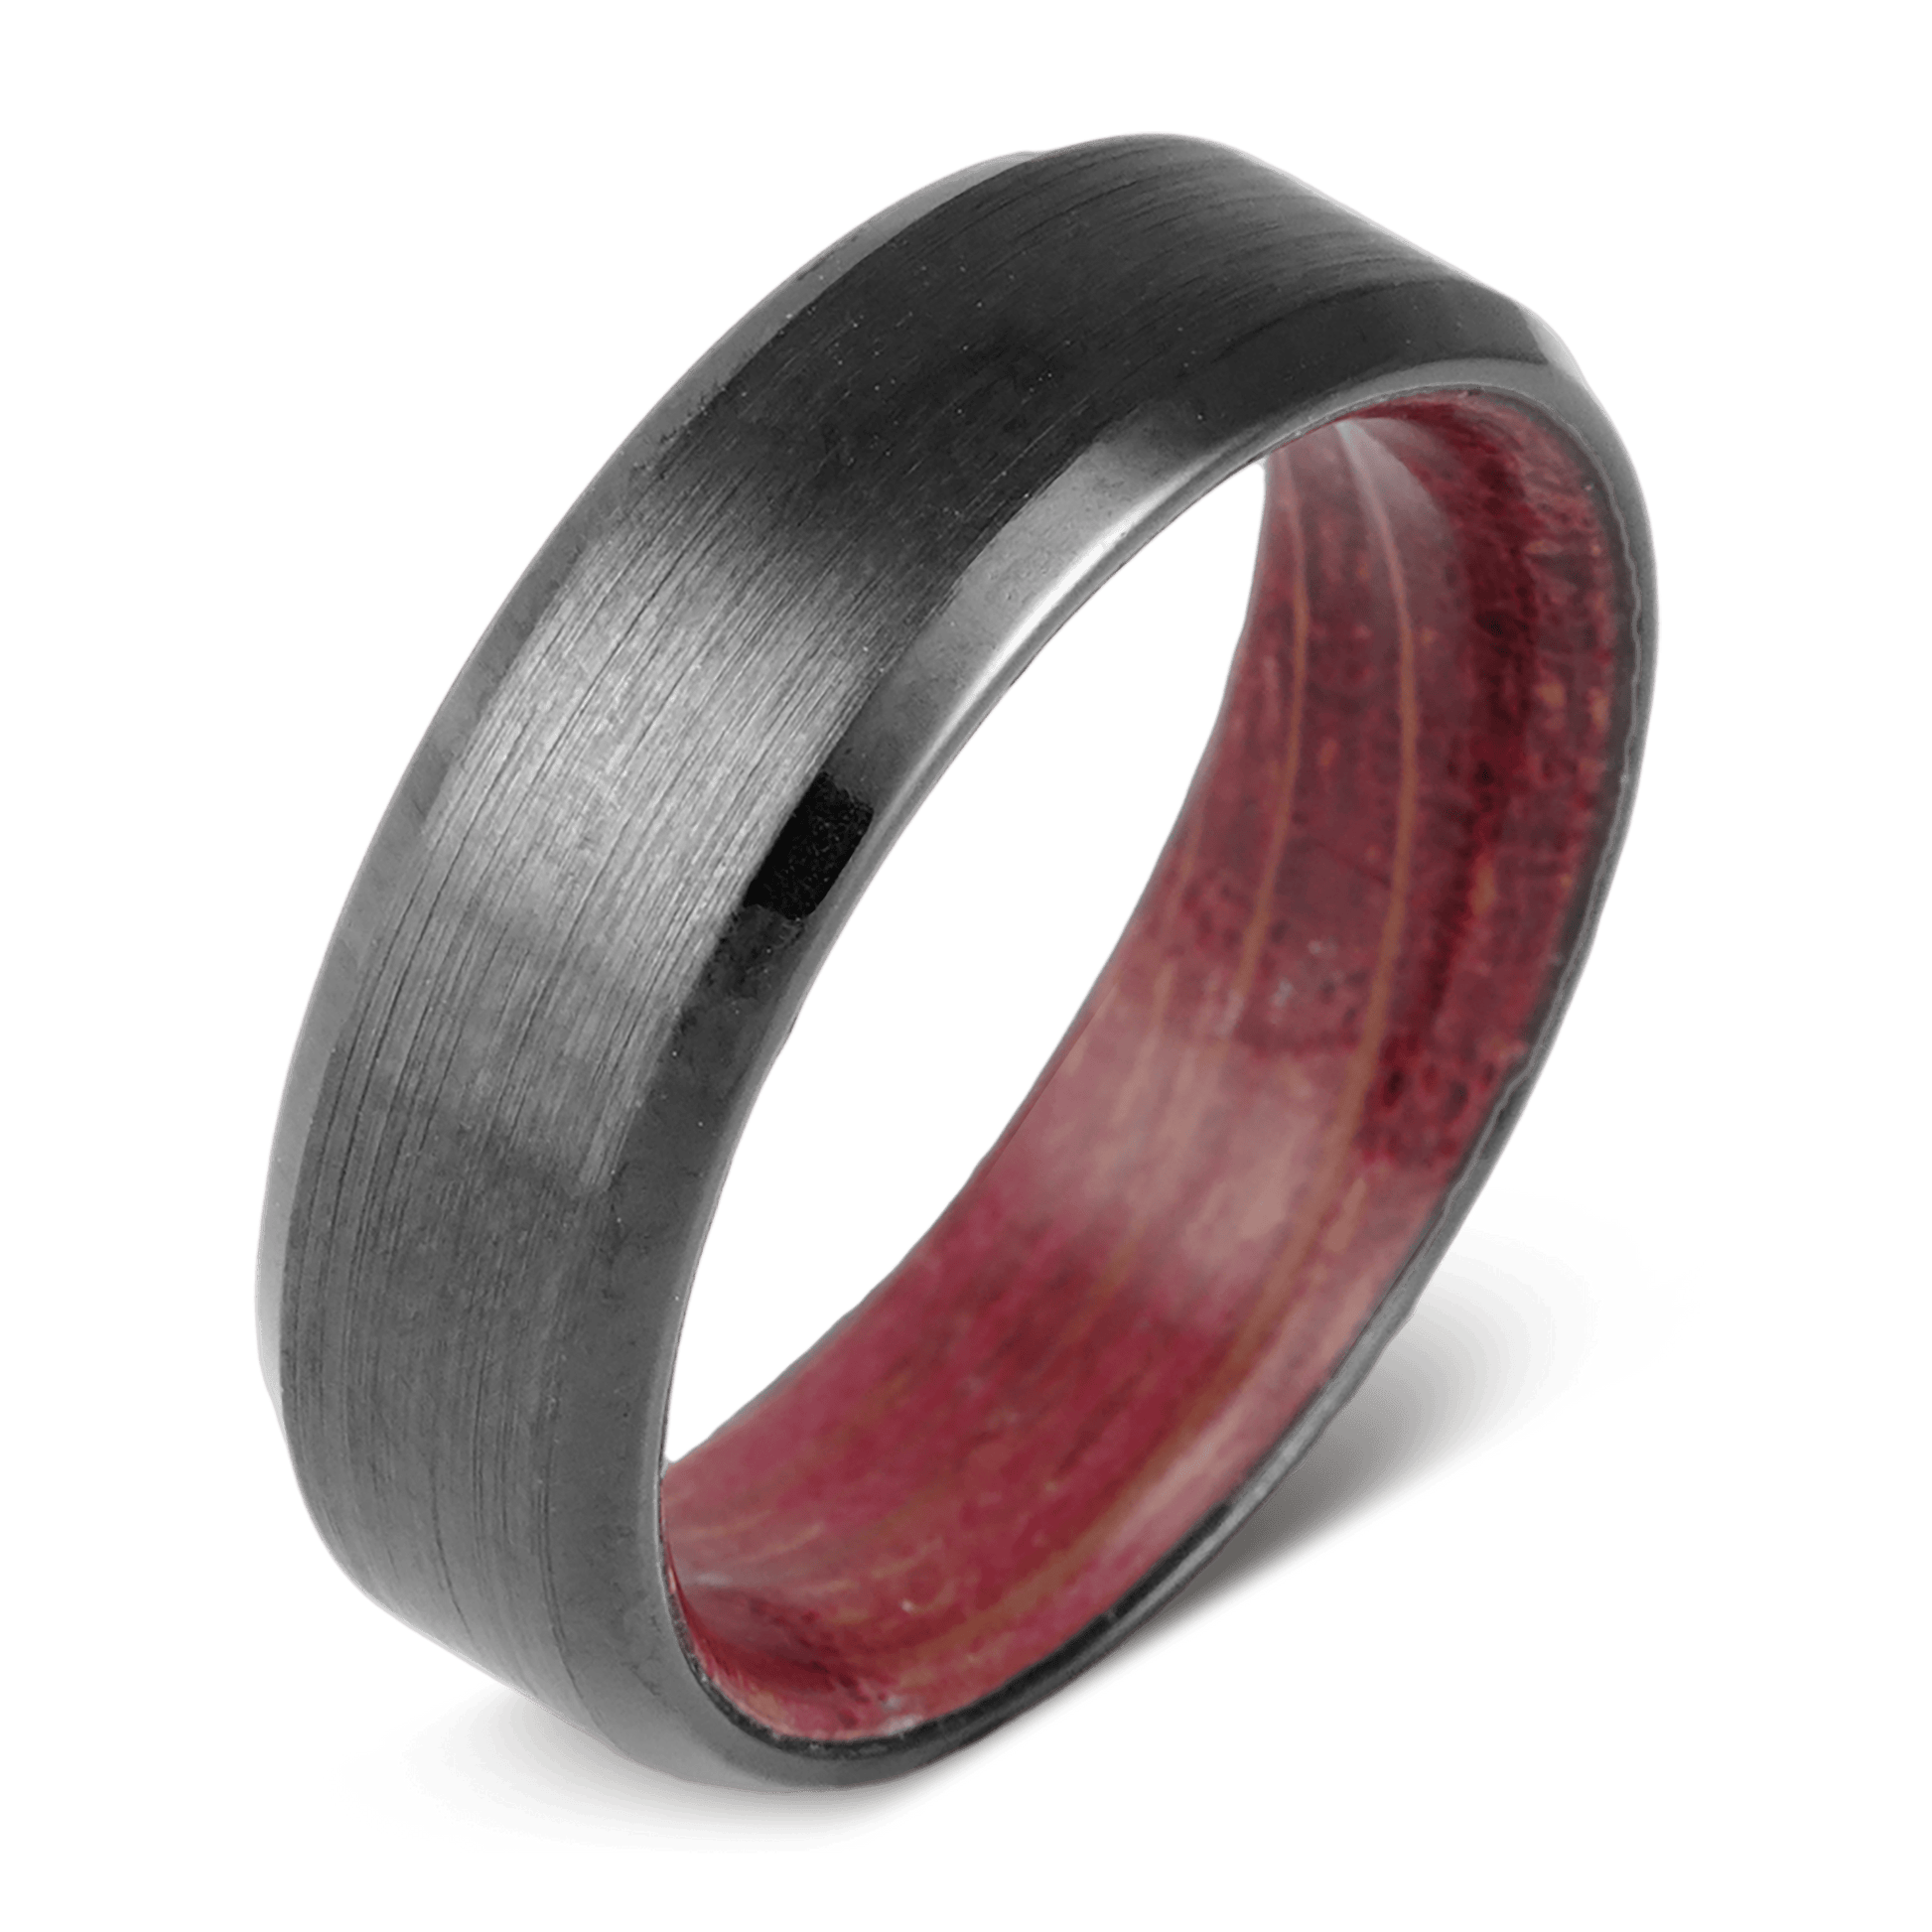 The Sommelier - Men's Wedding Rings - Manly Bands